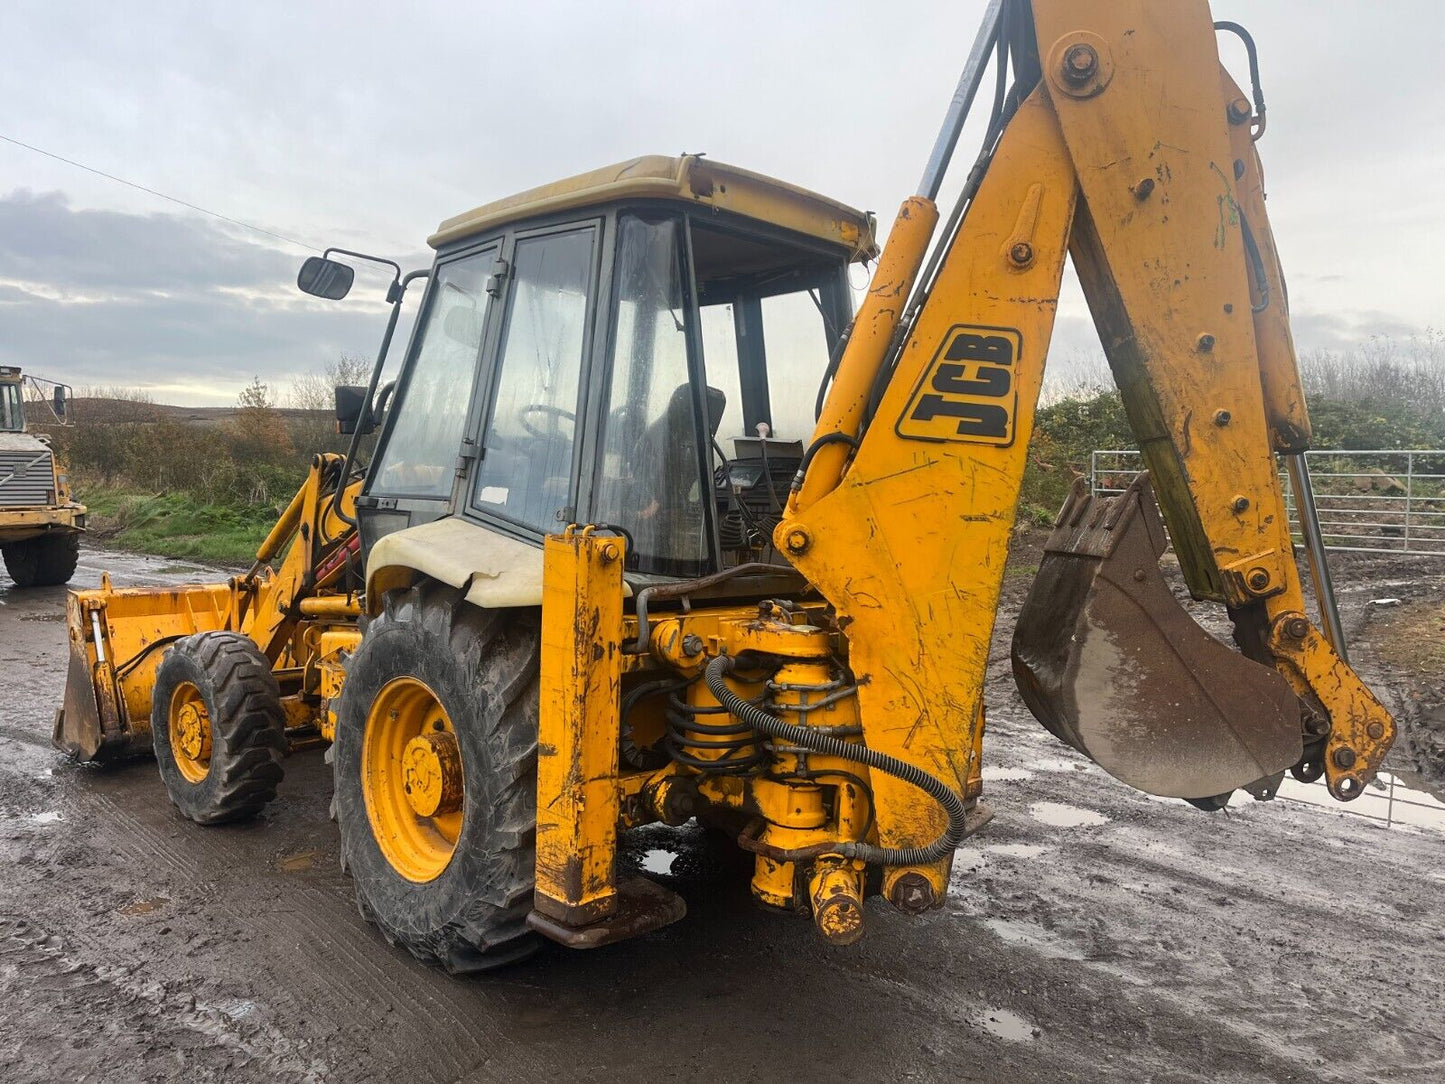 Bid on 1996 JCB 3CX 4 WHEEL DRIVE SITEMASTER BACKHOE LOADER- Buy &amp; Sell on Auction with EAMA Group